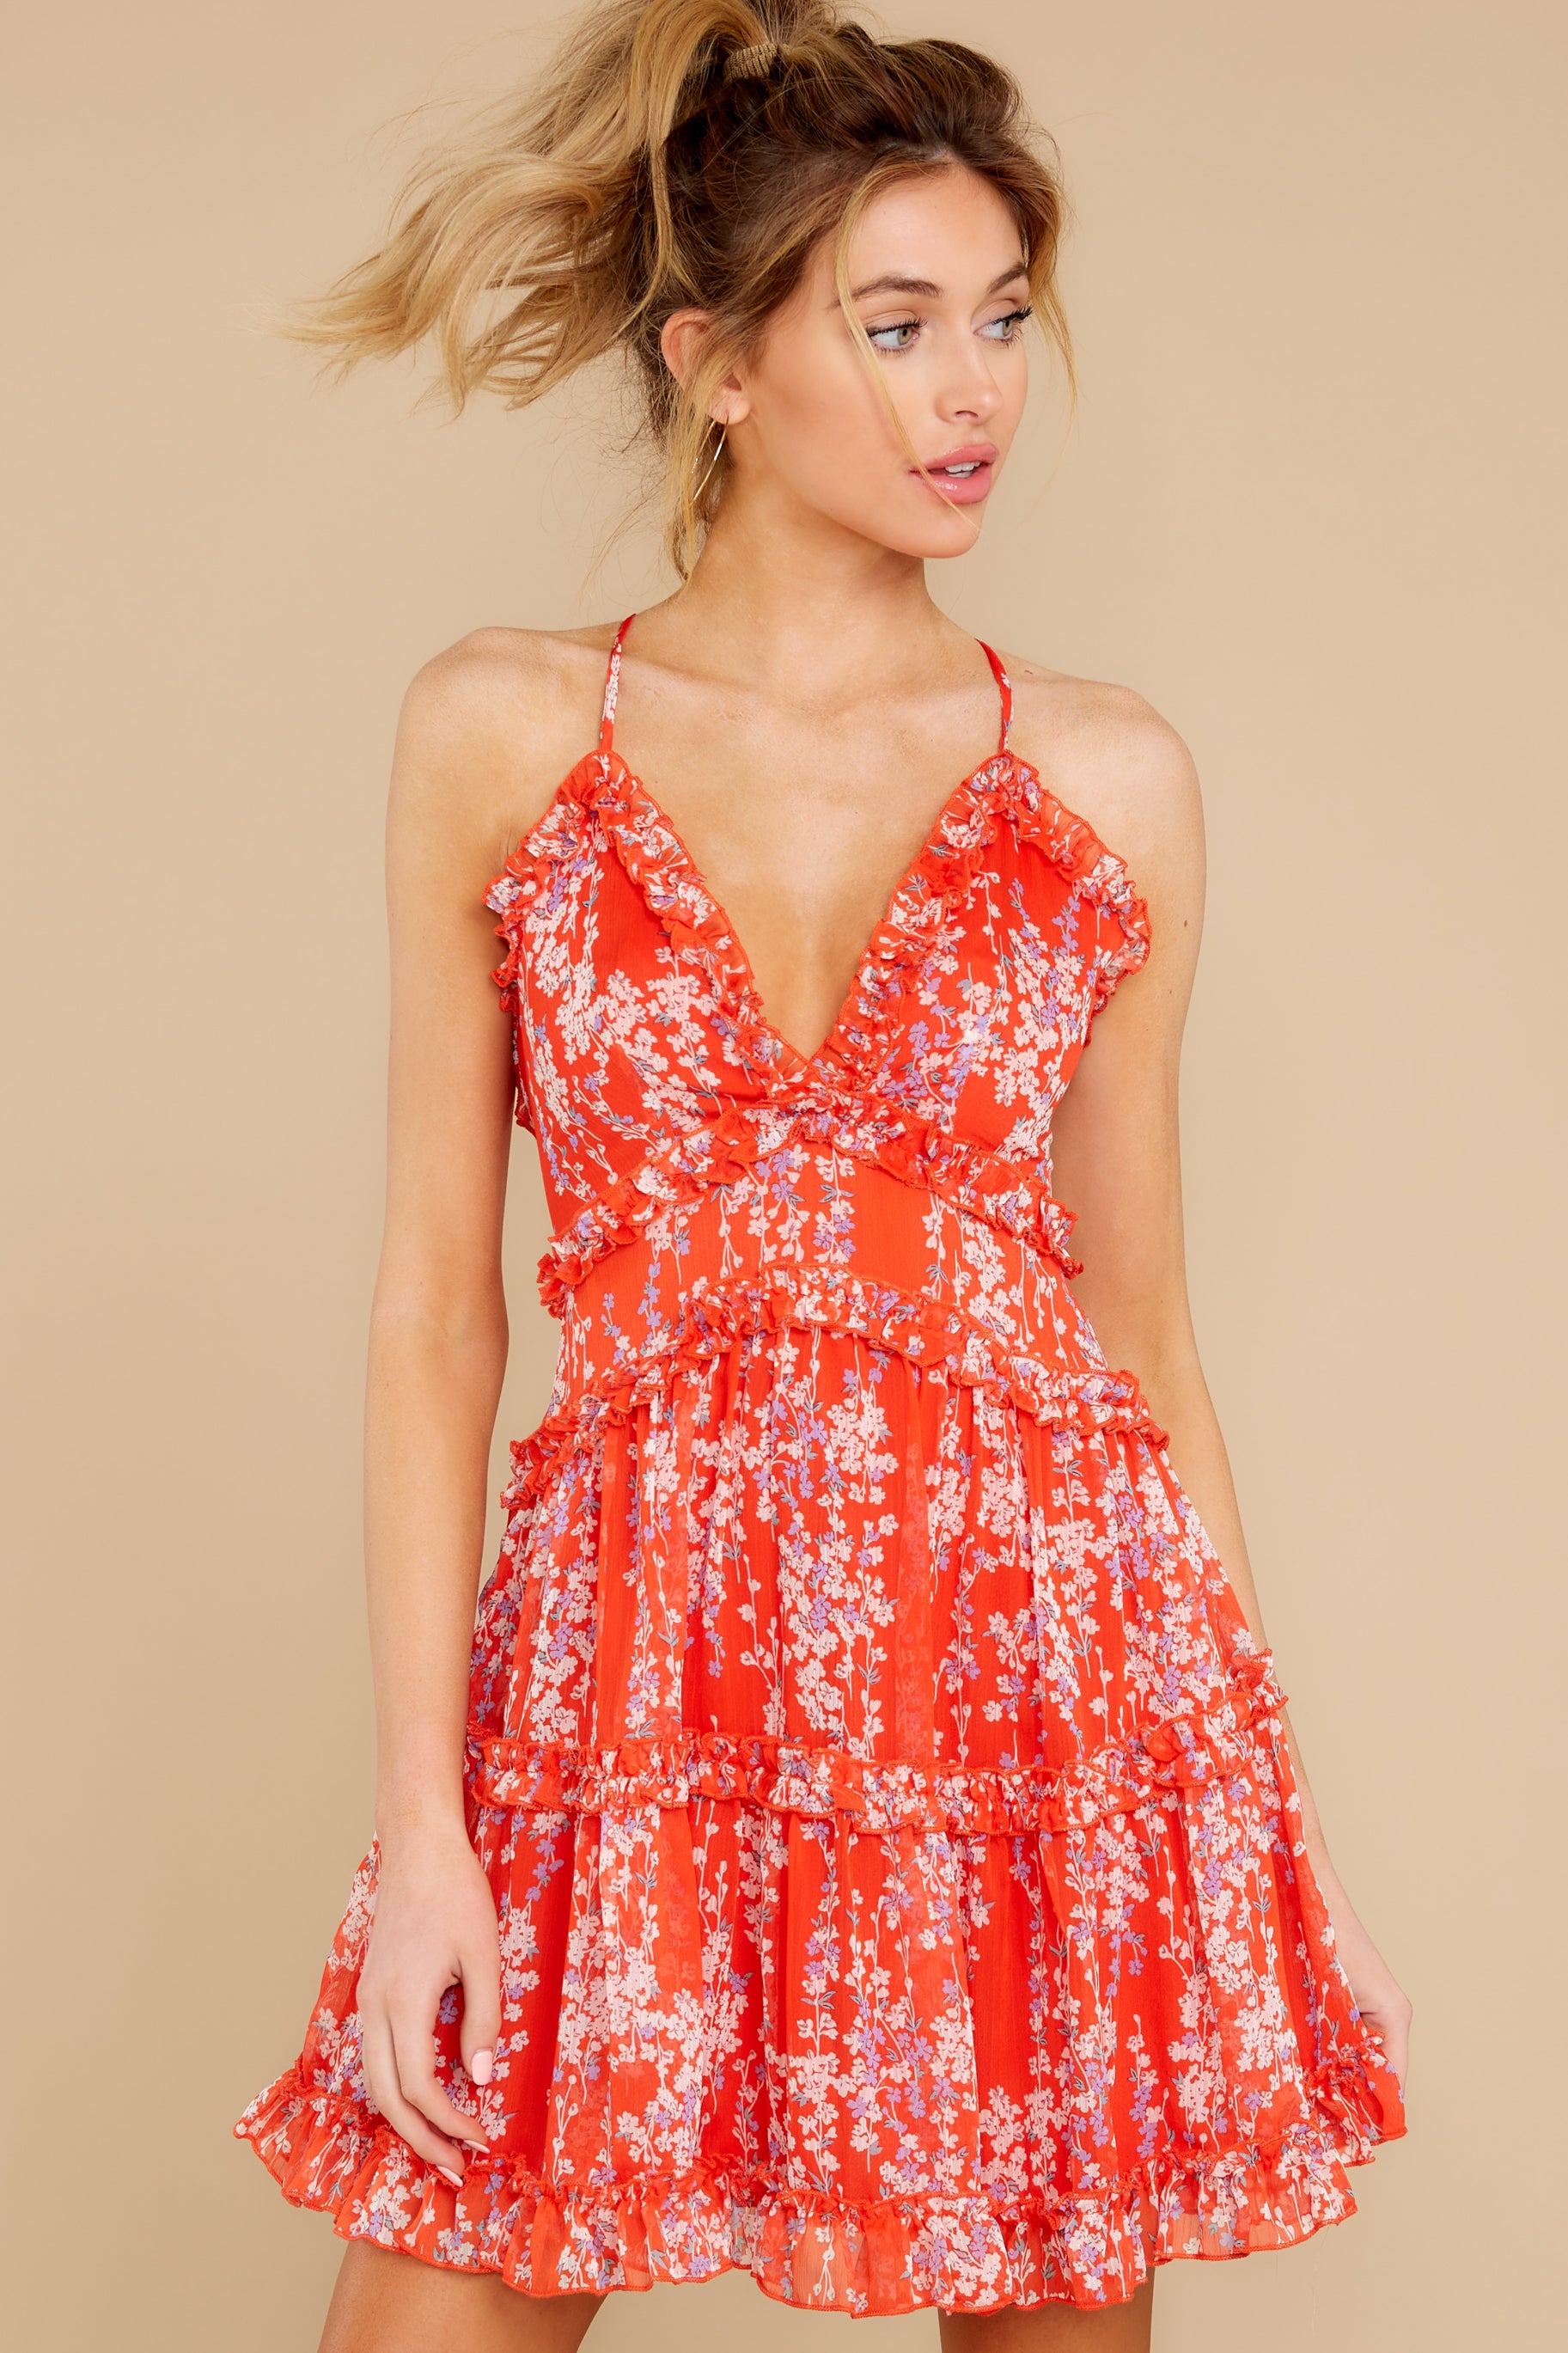 7 Hey There Tomato Red Floral Print Dress at reddress.com